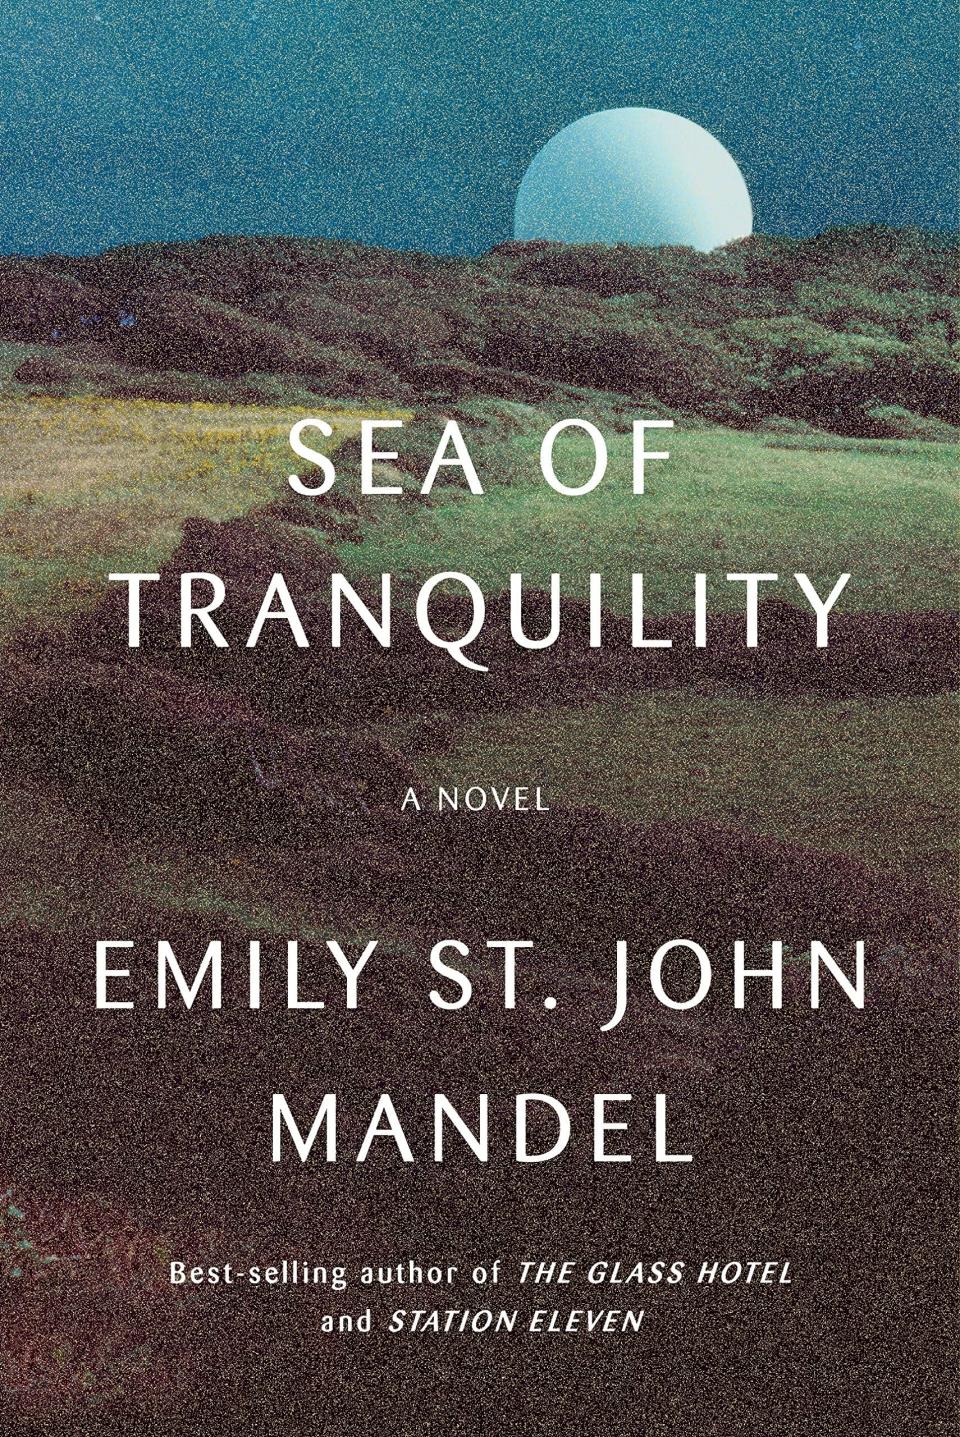 <p>Award-winning author Emily St. John Mandel is back with her most ambitious novel to date in <span>"Sea of Tranquility."</span> Spanning centuries, the story begins in 1912 with a young man who hears the echo of violin strings in the forest, before moving two centuries forward to cover the doomed book tour of moon-dweller Olive Llewellyn. Finally, the story winds its way to Gaspery-Jacques Roberts, a detective investigating an anomaly that appears to have driven a young man mad in his prime and trapped an author on a plague-ravaged Earth, among other strange occurrences. Now it's up to Gaspery to figure out who tampered with time itself and why. </p> <p><em>Release date: April 5</em></p>